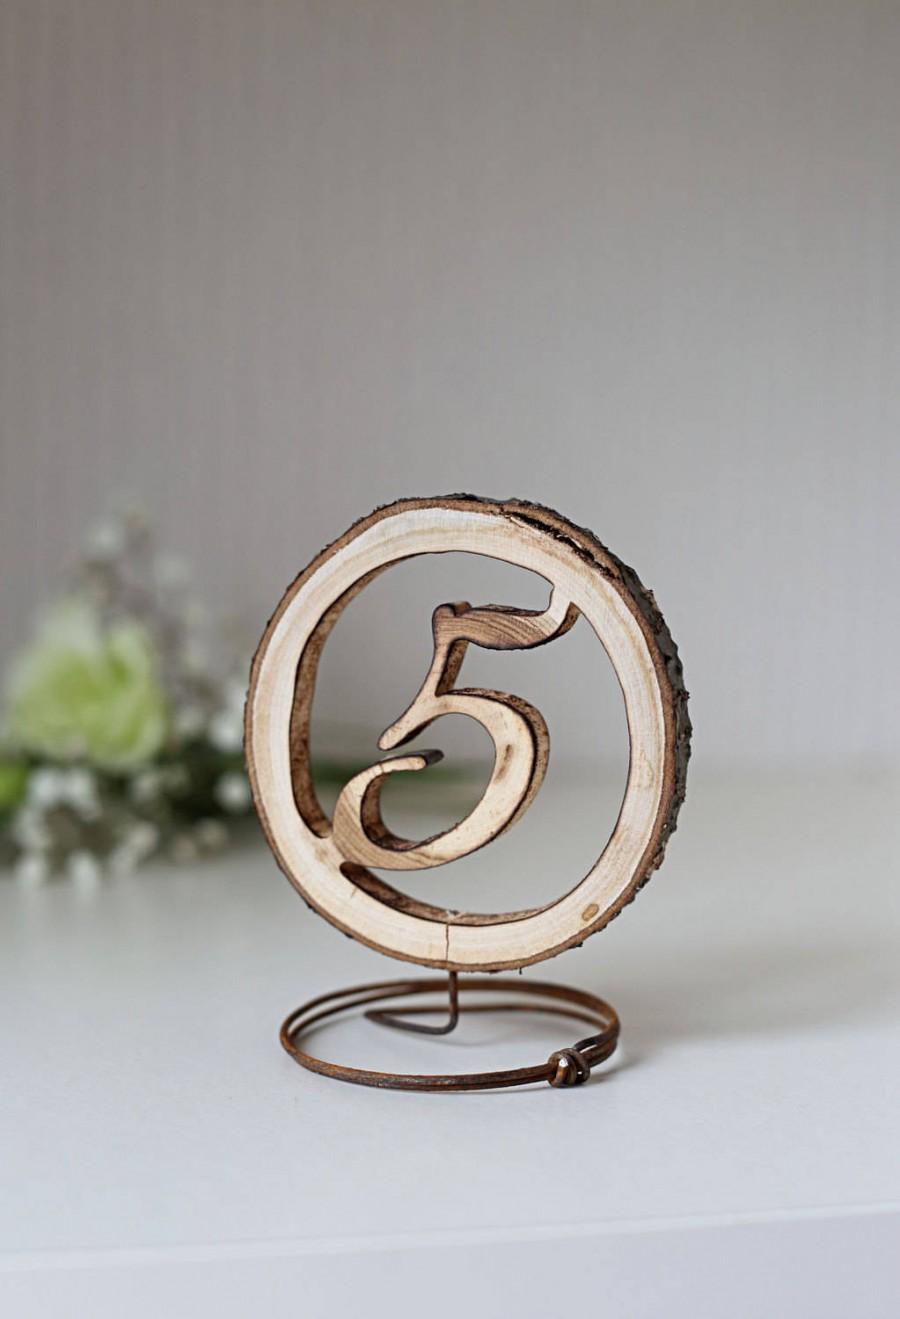 Hochzeit - Table numbers for wedding, rustic table numbers, free standing table numbers, table numbers, wedding table numbers, event table numbers